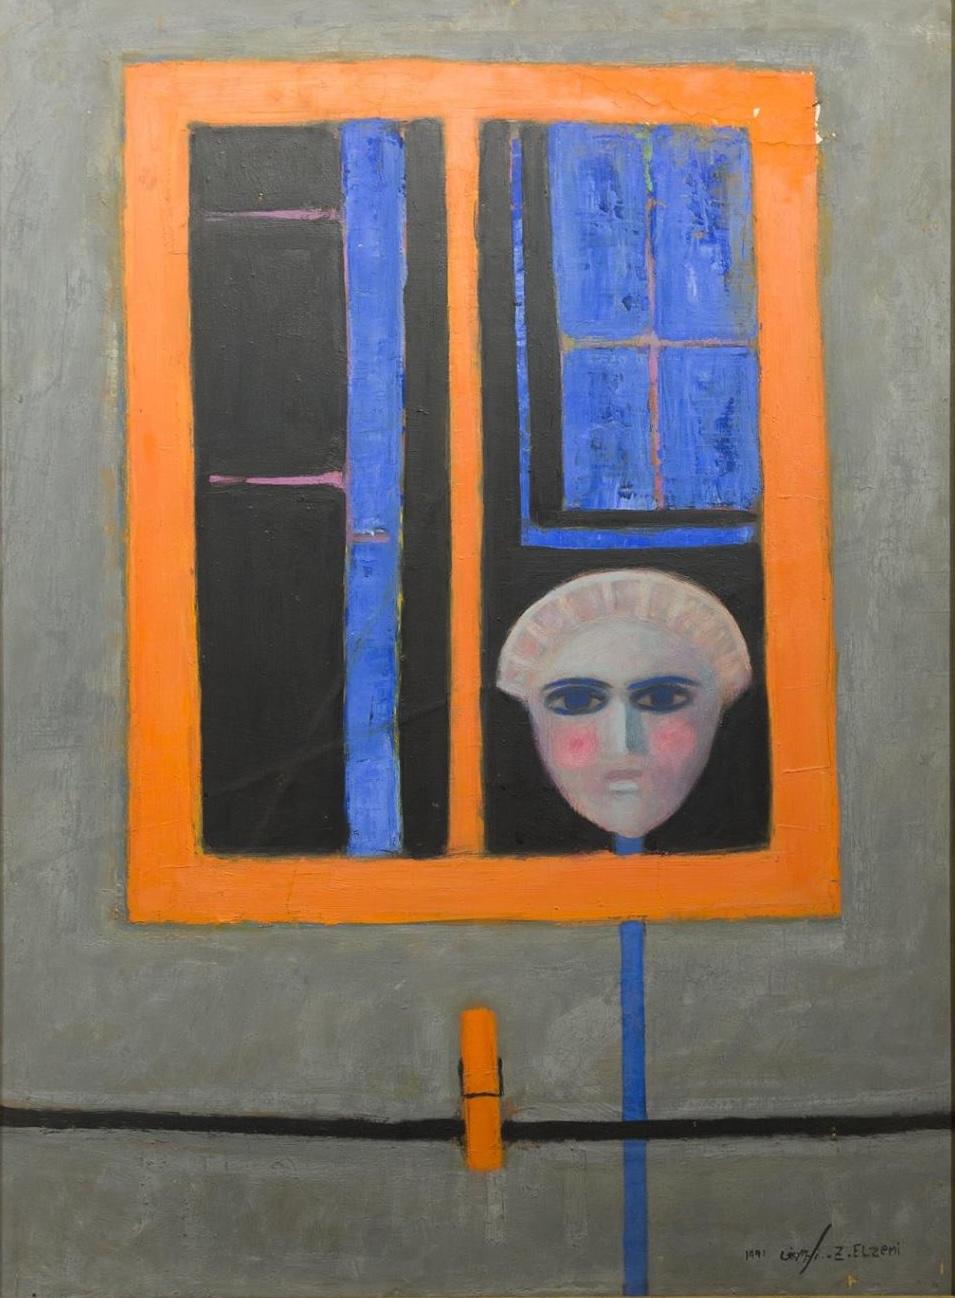 "The Mask" Abstract Oil Painting 31.5" x 24" in (1991) by Zaccaria Zeini

Medium: oil on canvas
Signed and dated 
Comes in old original frame 

Zaccaria El Zeini (1932 - 1993) was raised in the popular district of Sayyida Zienab in Old Cairo and